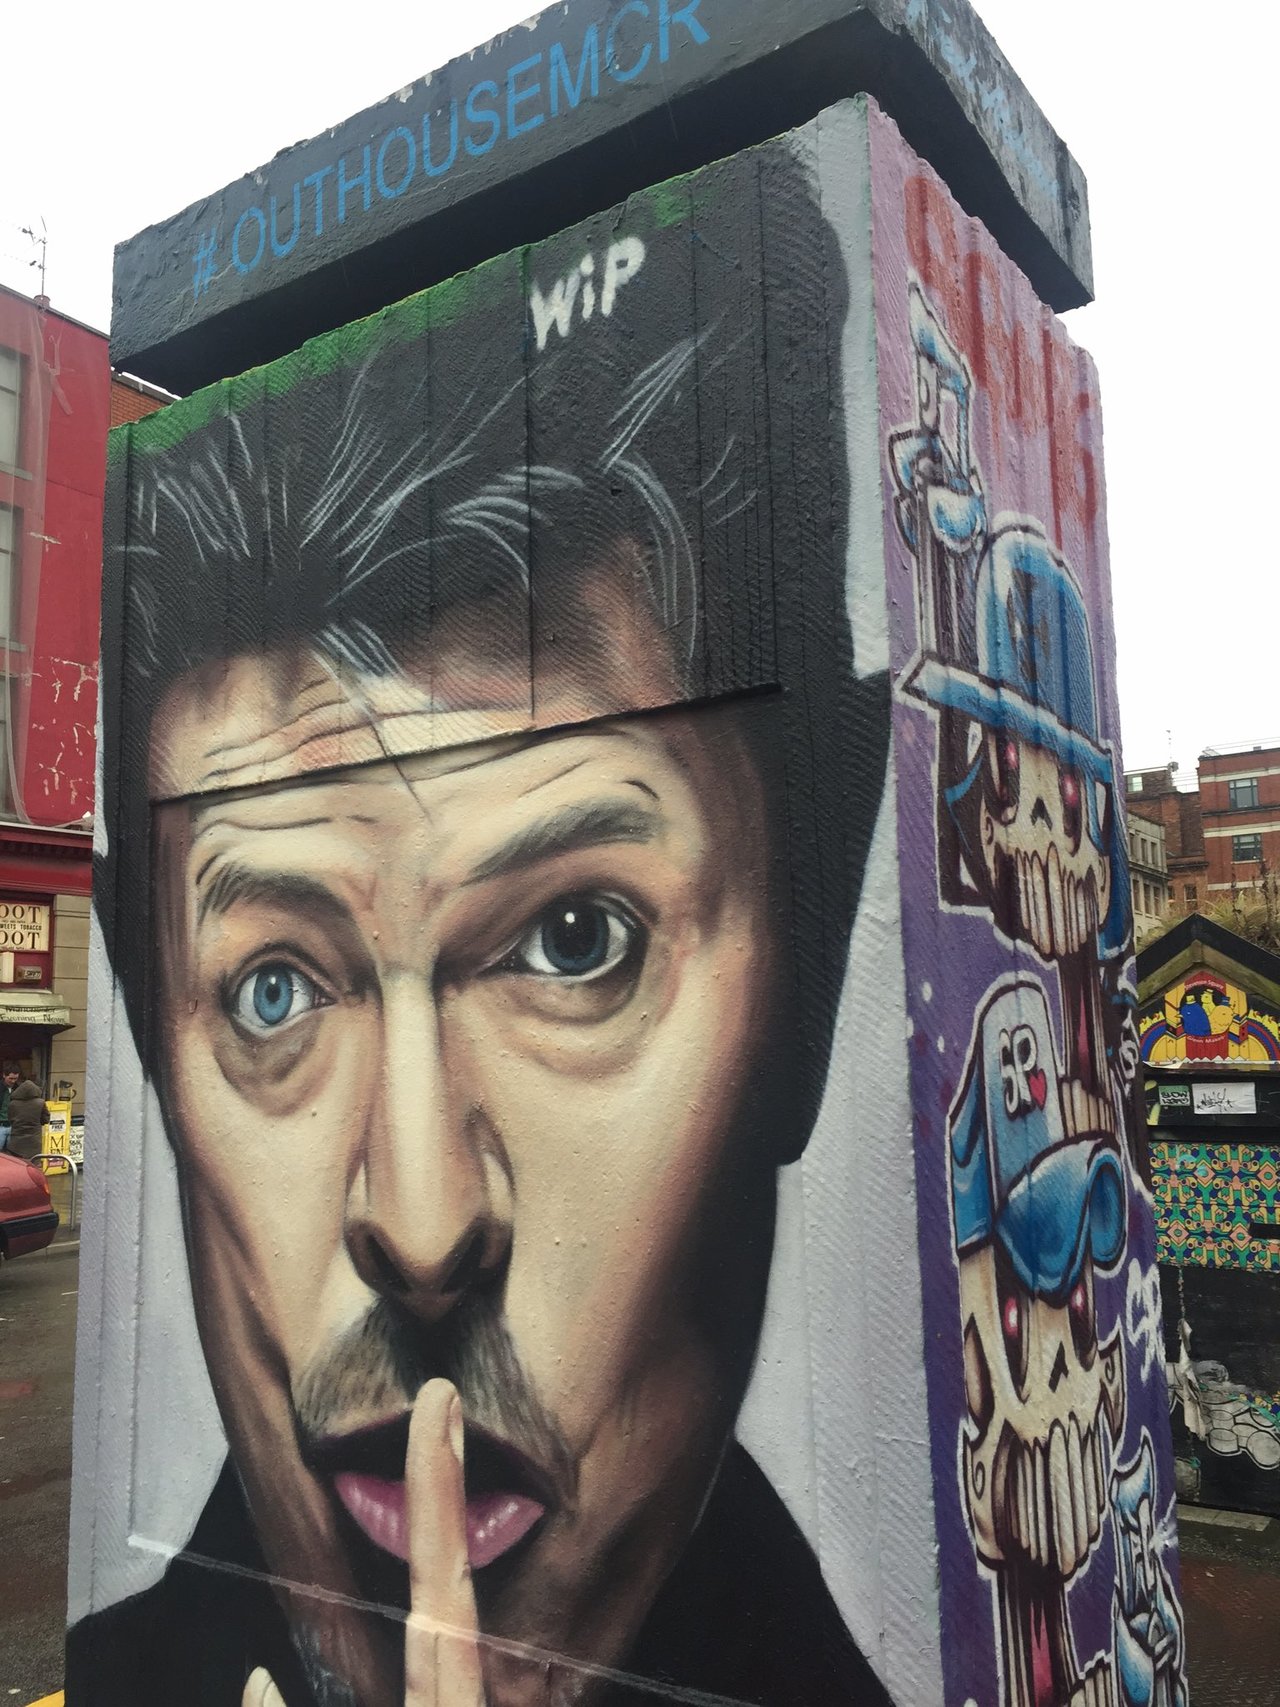 WiP David Bowie mural in Stevenson Square, Manchester created by #akse #streetart #graffiti https://t.co/Xsubnig9L7